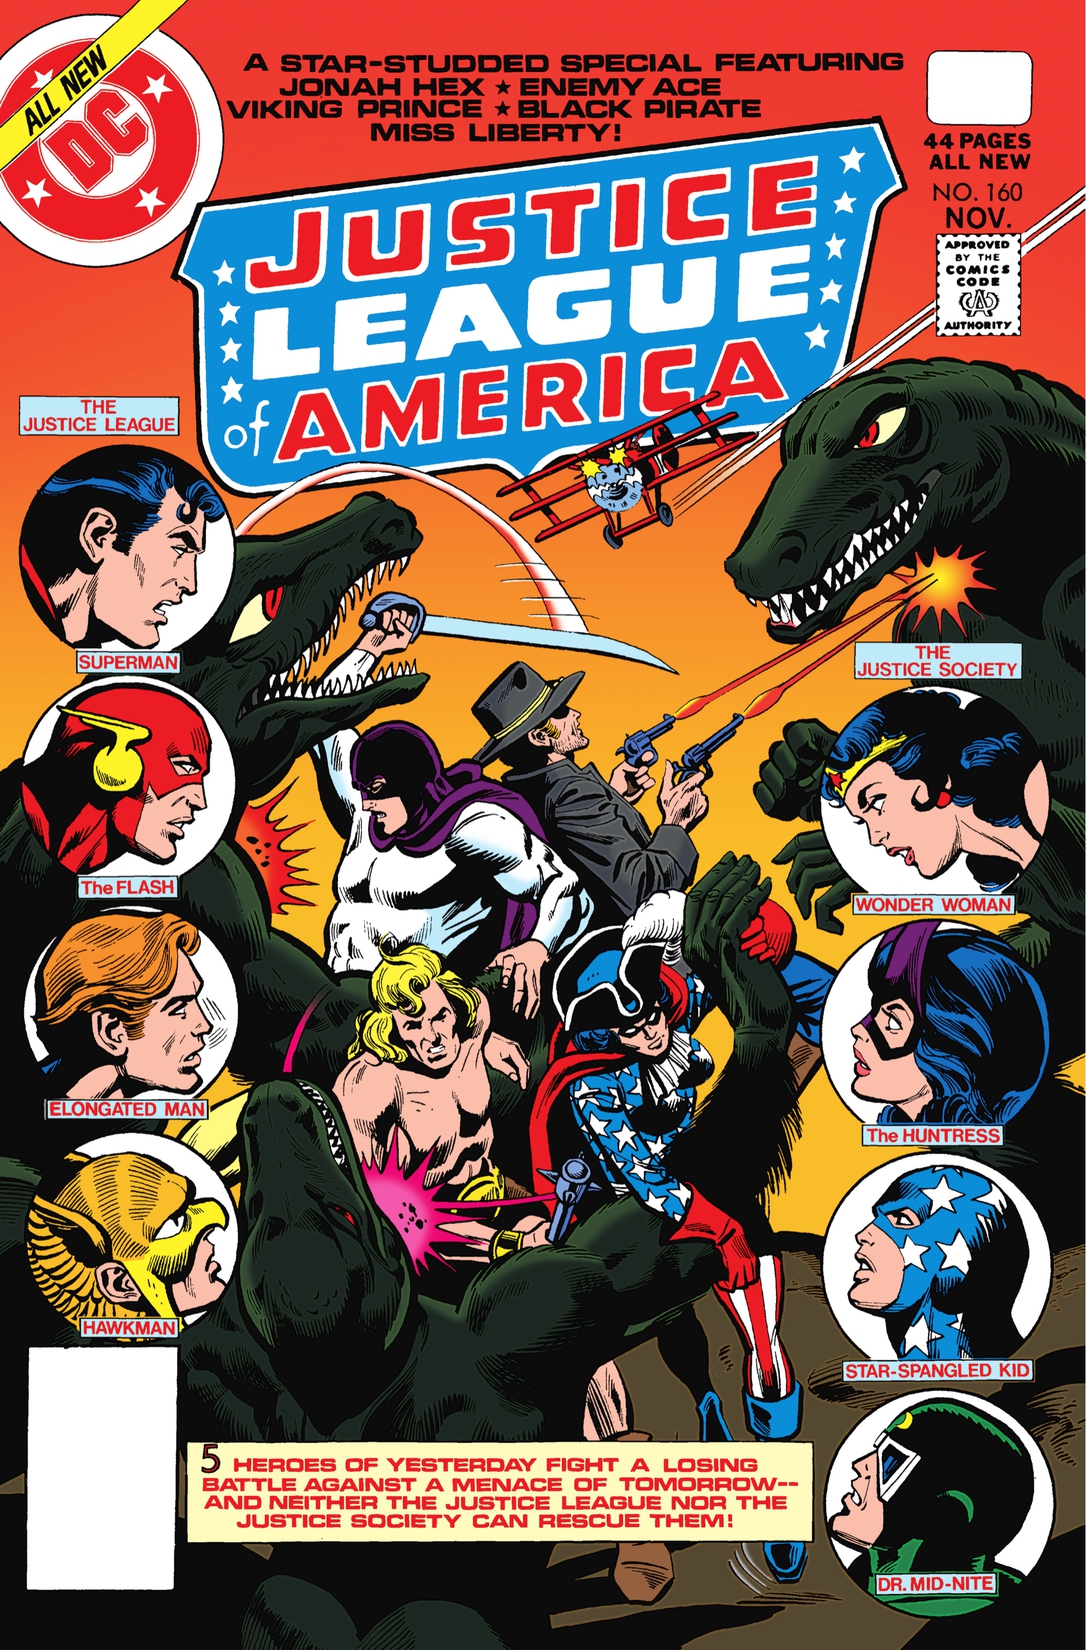 Justice League of America (1960-1987) #160 preview images